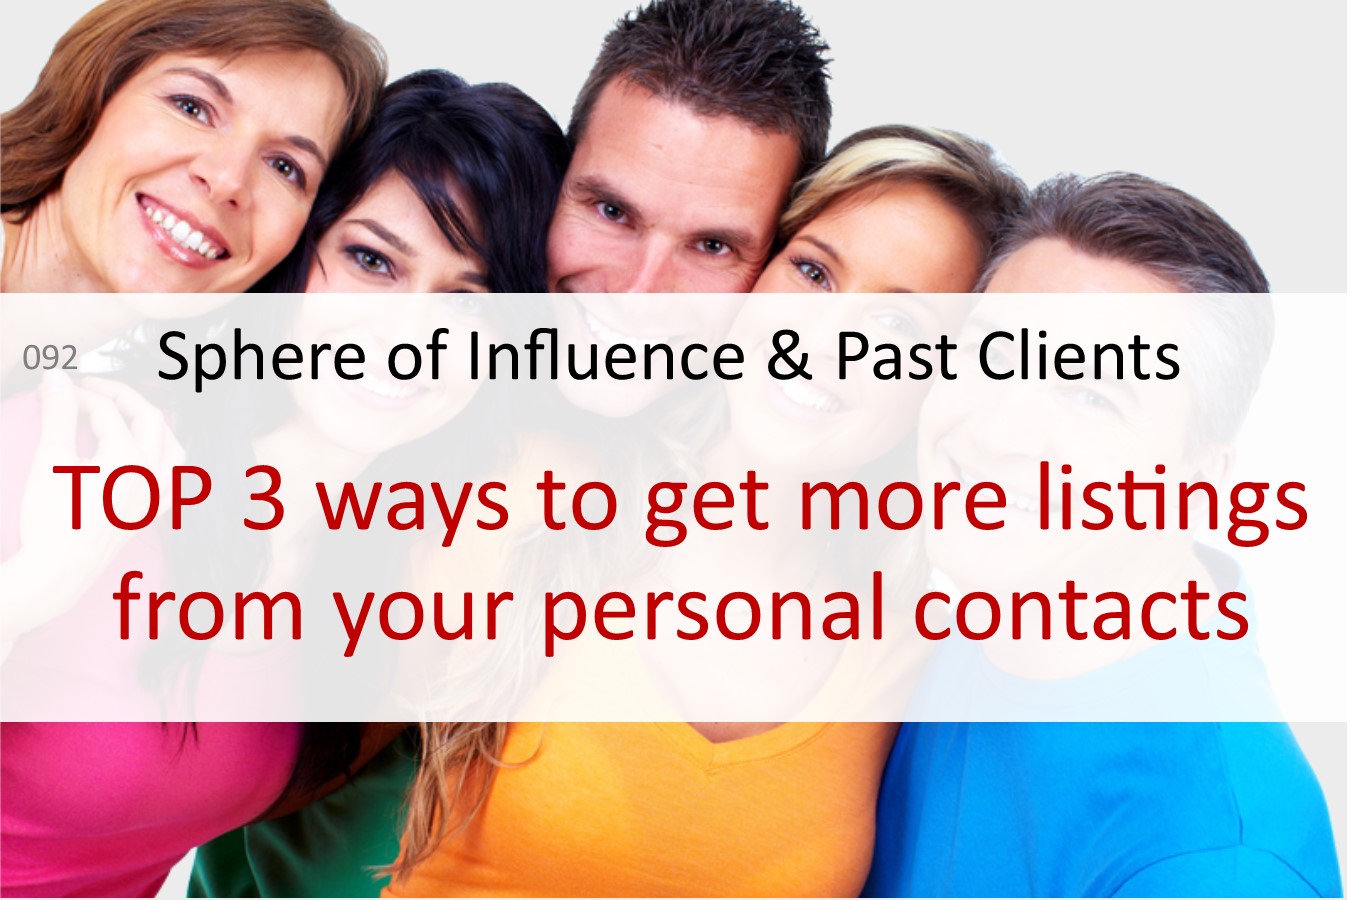 sphere of influence past clients referrals listings